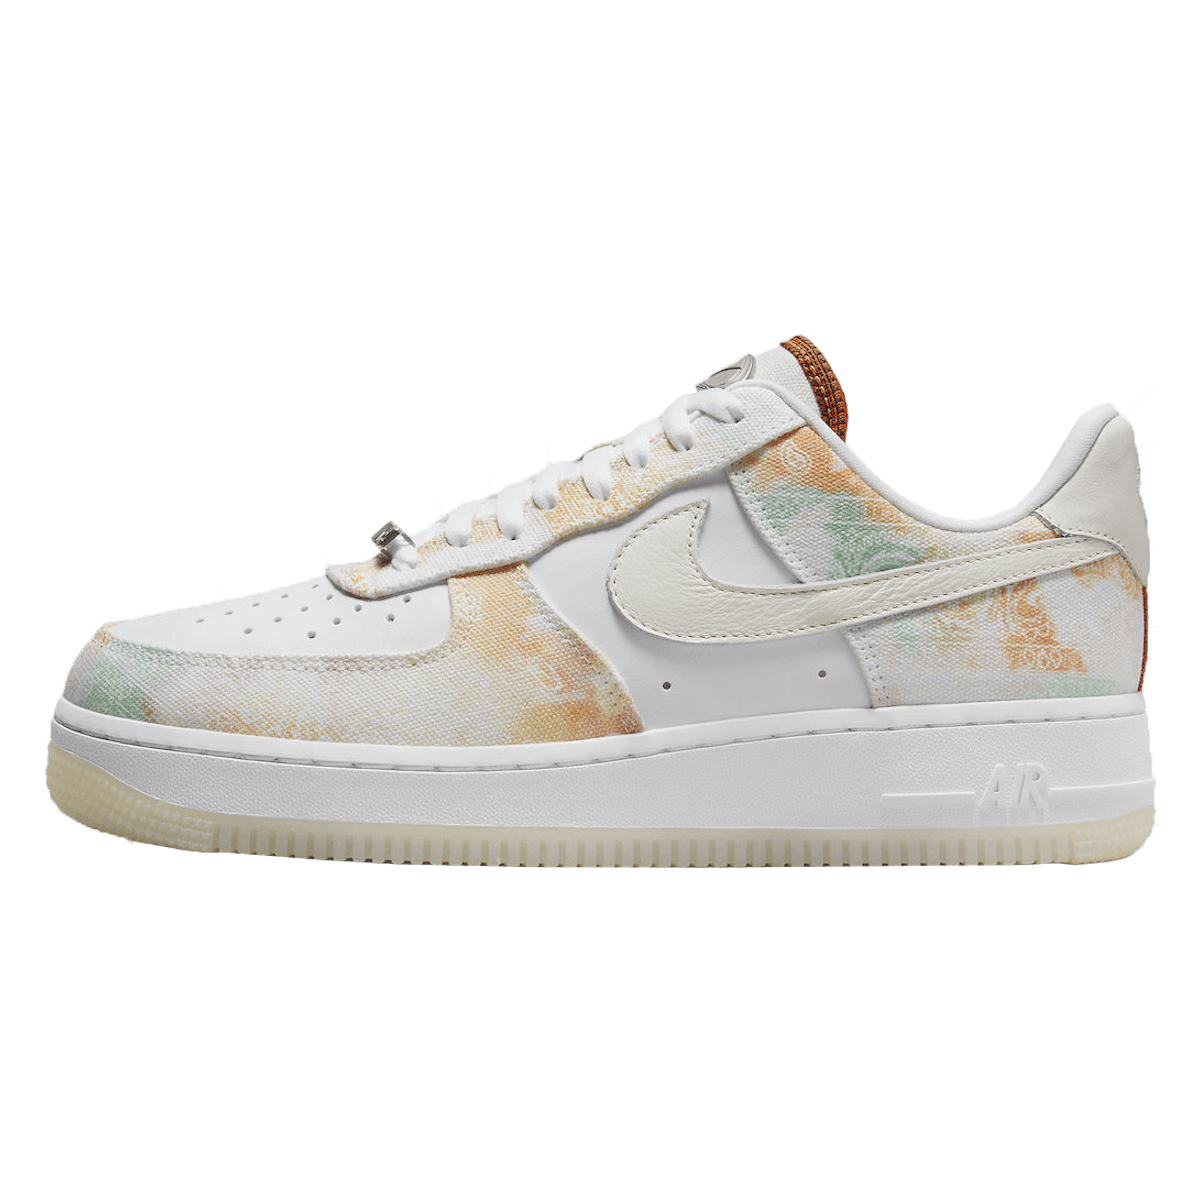 Nike Air Force 1 Low Wmns "Washed Paisley"